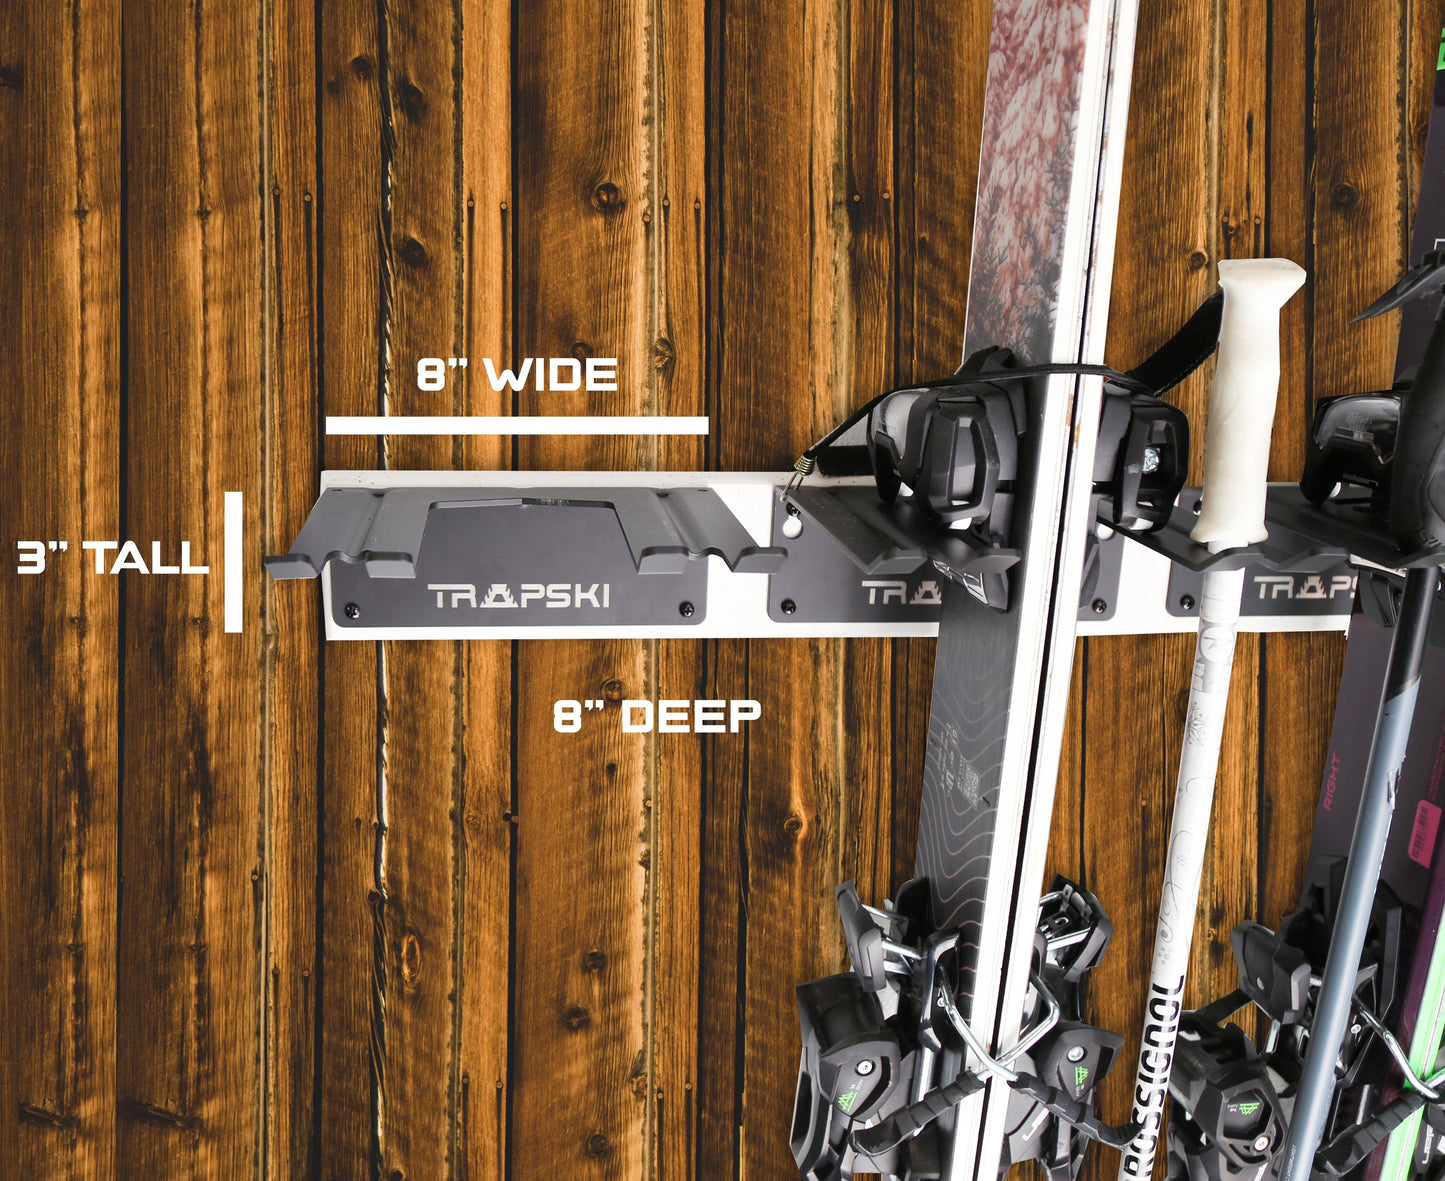 TRAPAWAY Wall Rack | Garage Organizer for Yard Tools, Gear & Equipment | Holds Skis or Snowboard by Bindings | Aluminum | No Moving Parts to break or pinch points - TRAPSKI, LLC